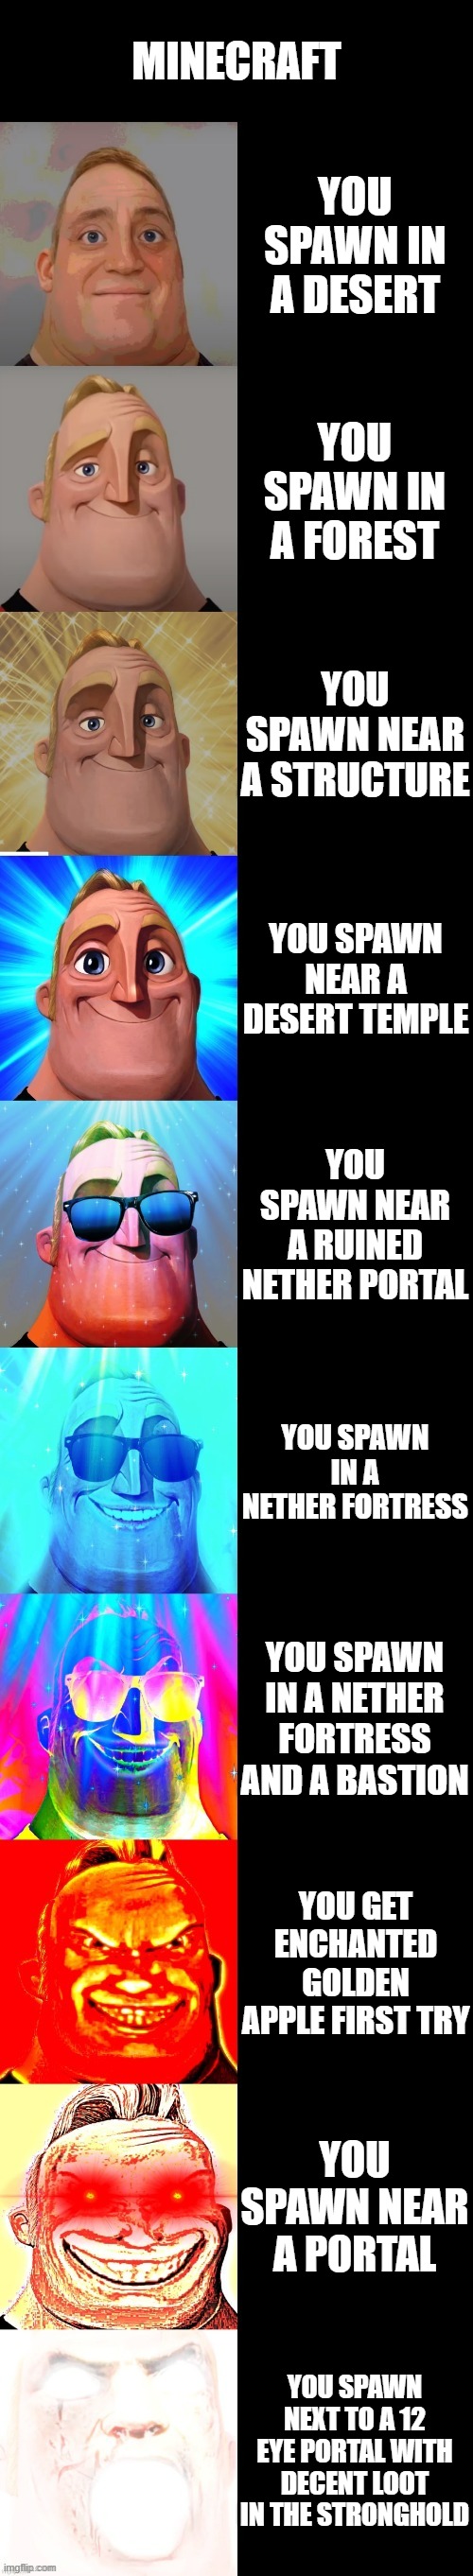 mr incredible becoming canny | MINECRAFT; YOU SPAWN IN A DESERT; YOU SPAWN IN A FOREST; YOU SPAWN NEAR A STRUCTURE; YOU SPAWN NEAR A DESERT TEMPLE; YOU SPAWN NEAR A RUINED NETHER PORTAL; YOU SPAWN IN A NETHER FORTRESS; YOU SPAWN IN A NETHER FORTRESS AND A BASTION; YOU GET ENCHANTED GOLDEN APPLE FIRST TRY; YOU SPAWN NEAR A PORTAL; YOU SPAWN NEXT TO A 12 EYE PORTAL WITH DECENT LOOT IN THE STRONGHOLD | image tagged in mr incredible becoming canny | made w/ Imgflip meme maker